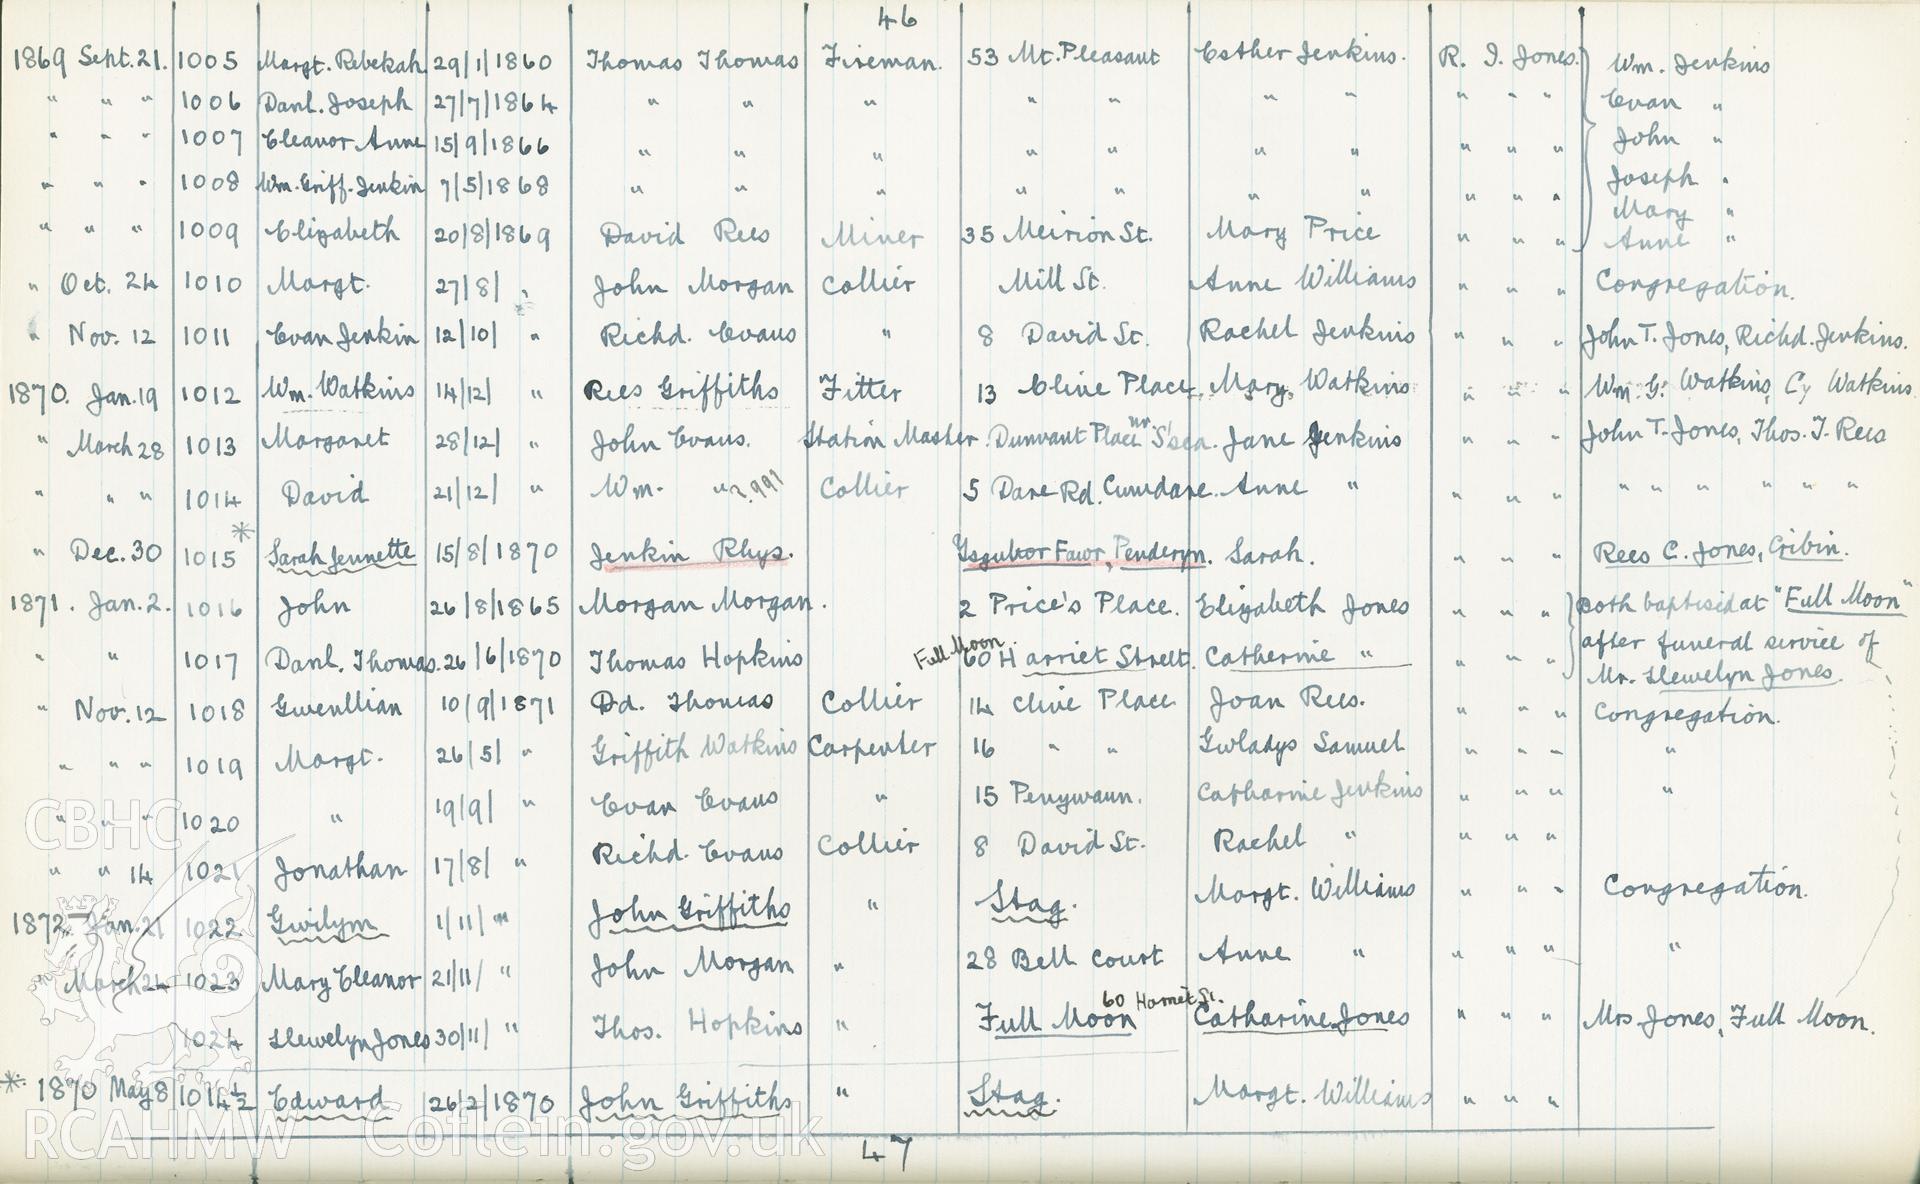 "Baptism Registered" book for Hen Dy Cwrdd, made between April 19th and 28th, 1941, by W. W. Price. Page listing baptisms from 21st September 1869 to 24th March 1872. Donated to the RCAHMW as part of the Digital Dissent Project.